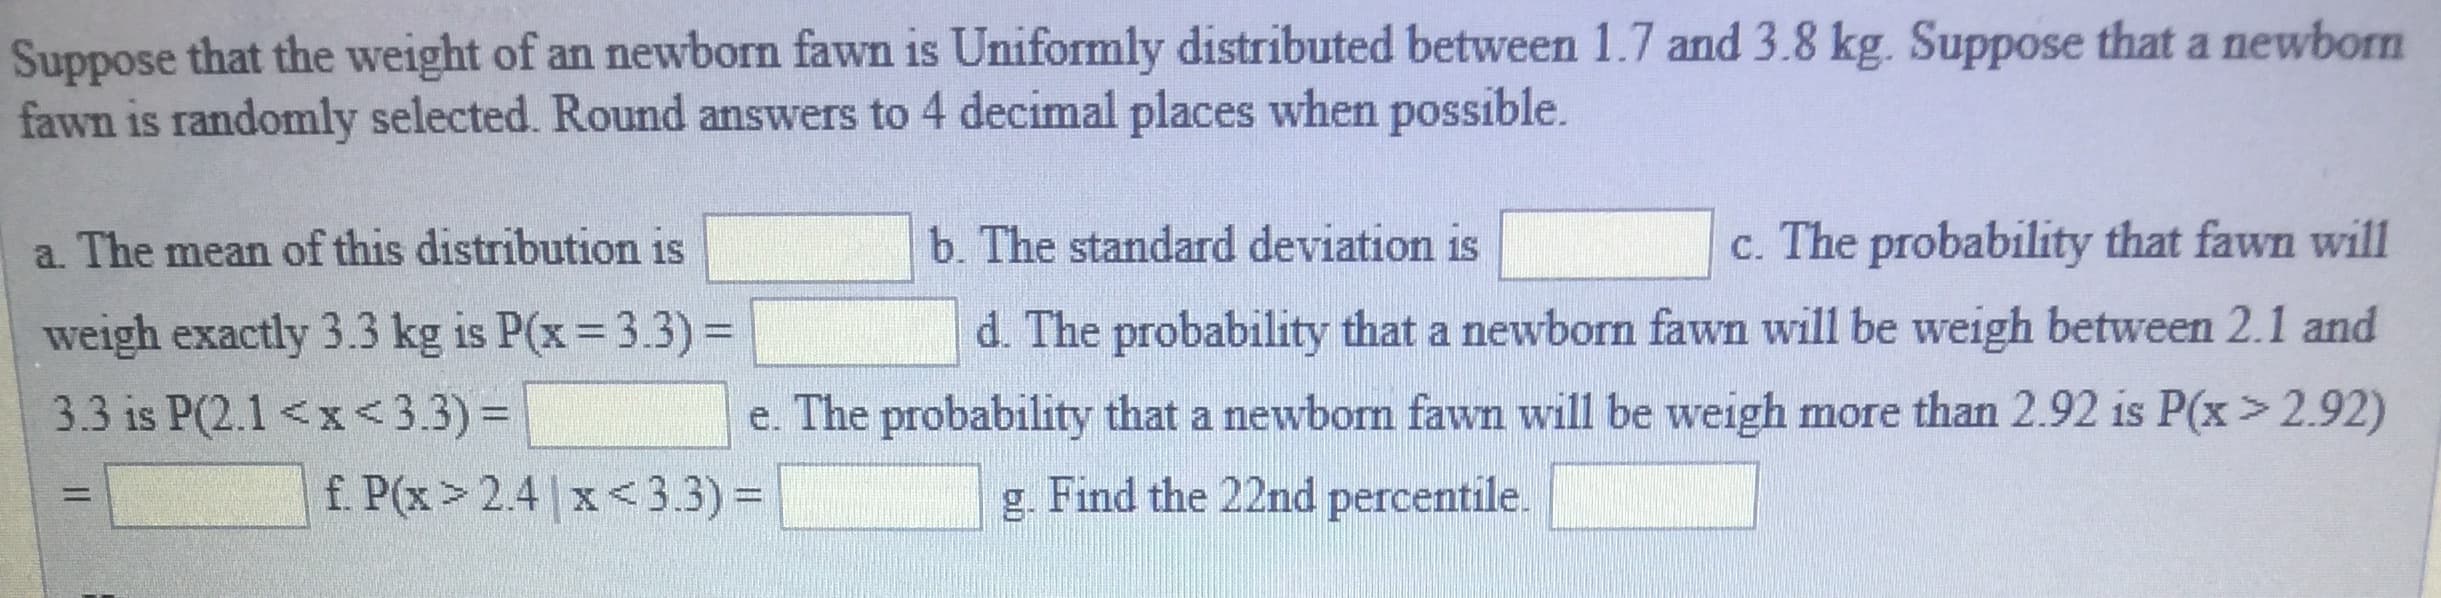 Suppose that the weight of an newborn fawn is Uniformly distributed between 1.7 and 3.8 kg. Suppose that a newborn
fawn is randomly selected. Round answers to 4 decimal places when possible.
a. The mean of this distribution is
weigh exactly 3.3 kg is P(x 3.3)-
33 is P(2.1 <x <3.3)e
b. The standard deviation isc. The probability that fawn will
d. The probability that a newborn fawn will be weigh between 2.1 and
e. The probability that a newborm fawn will be weigh more than 2.92 is P(x > 2.92)
2.4 x<3.3)
g. Find the 22nd percentile.
